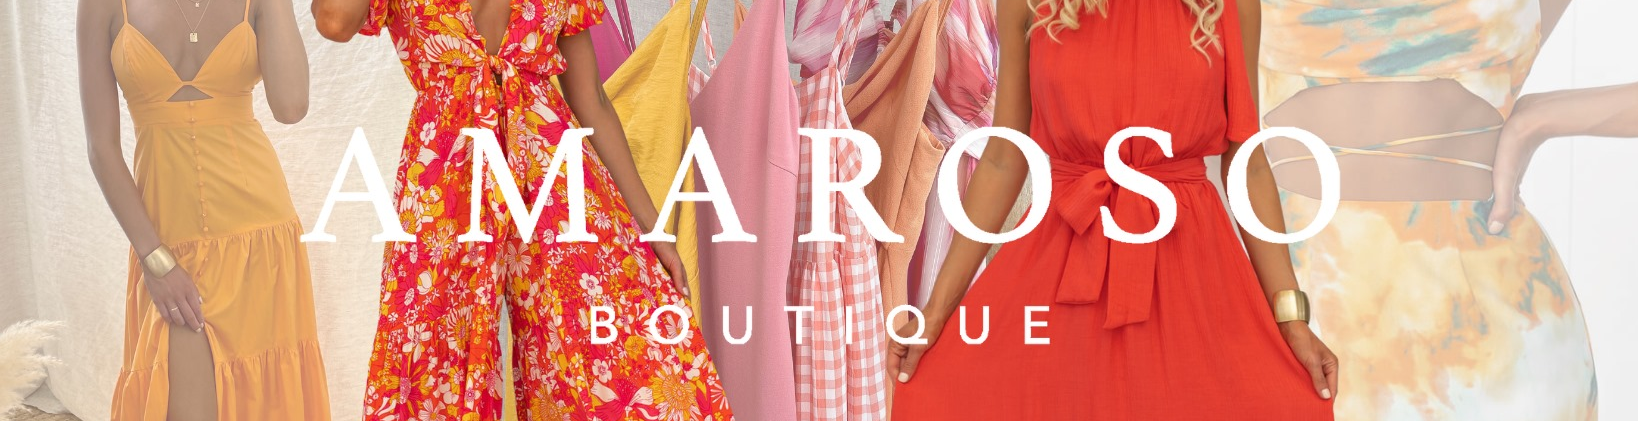 Amaroso Boutique extra 10% OFF on your first order when you sign up